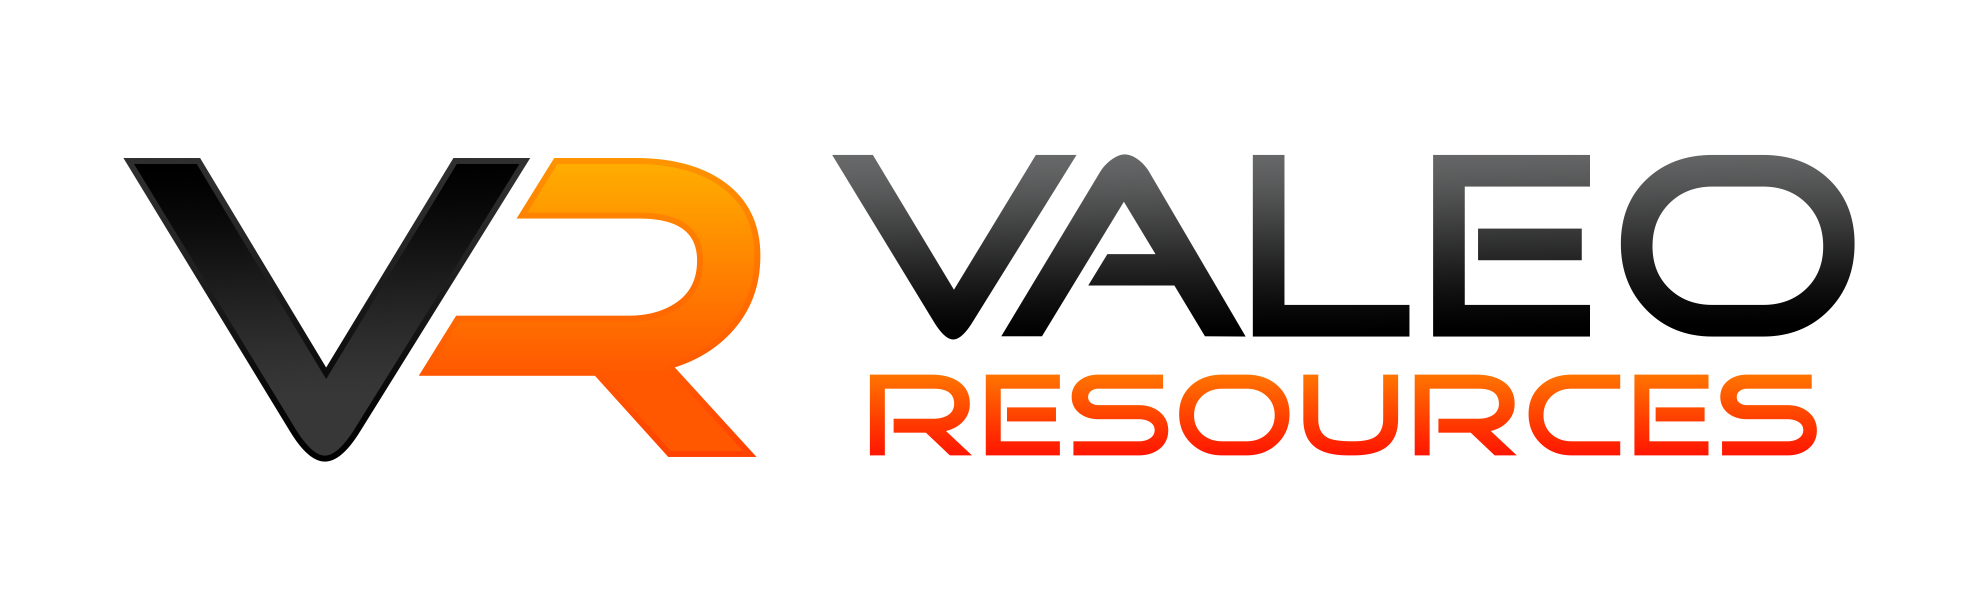 Valeo Resources  Experts in Health Care Talent Acquisition